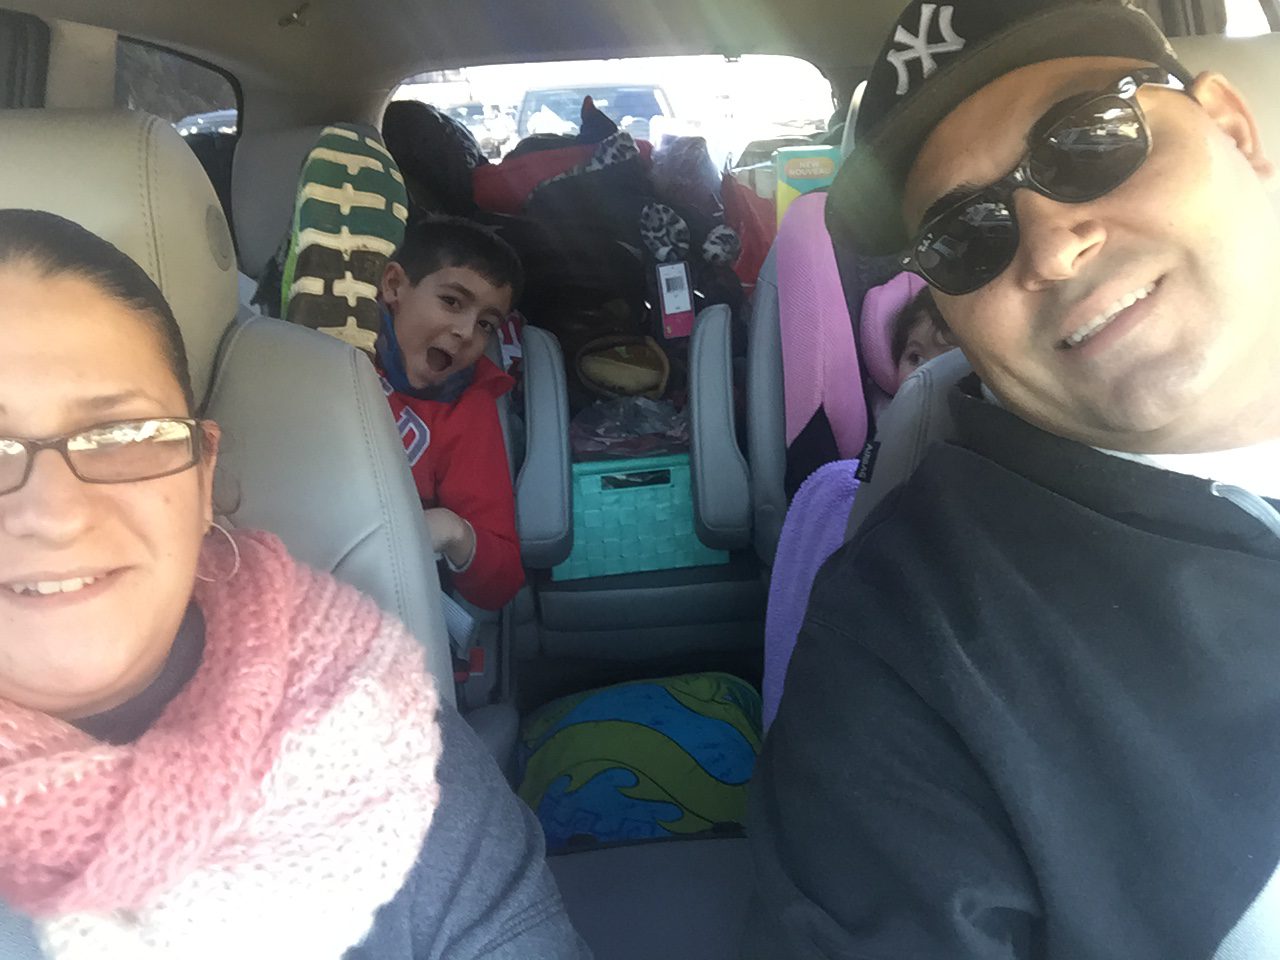 Family Road Trip in the 2016 Buick Enclave - A great crossover SUV for the entire family